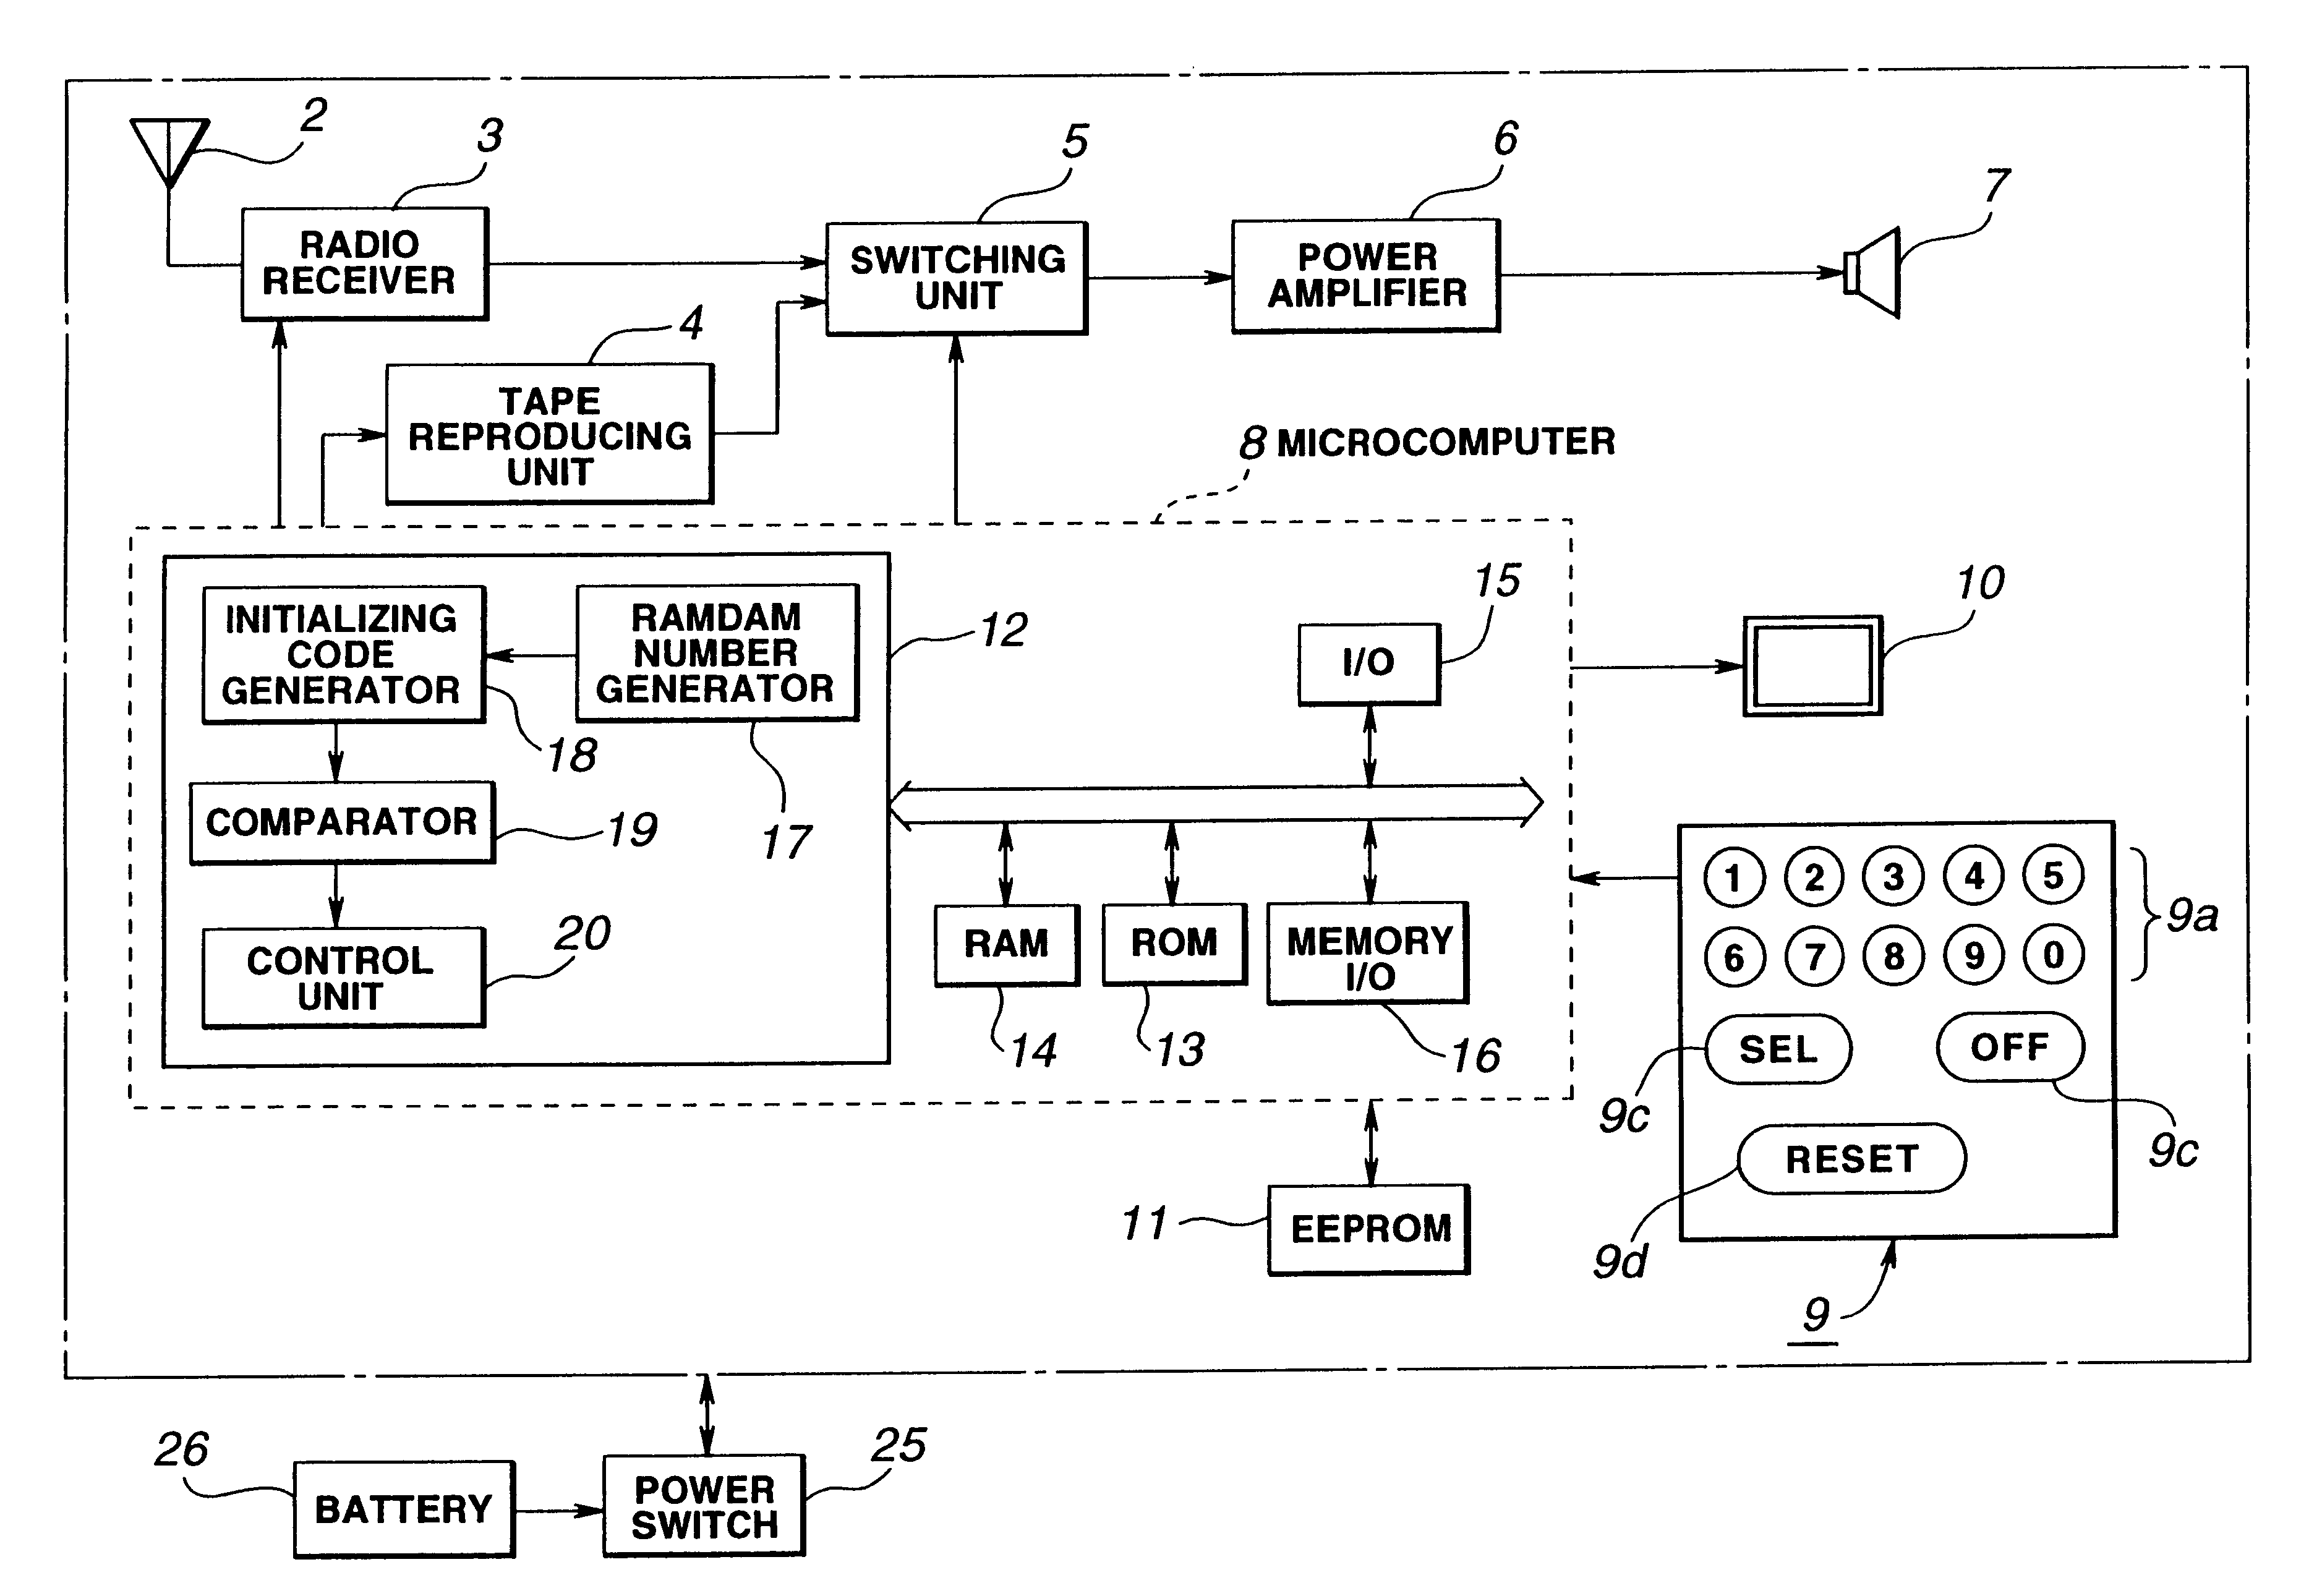 Electronic instrument having resettable security code and method for resetting security code